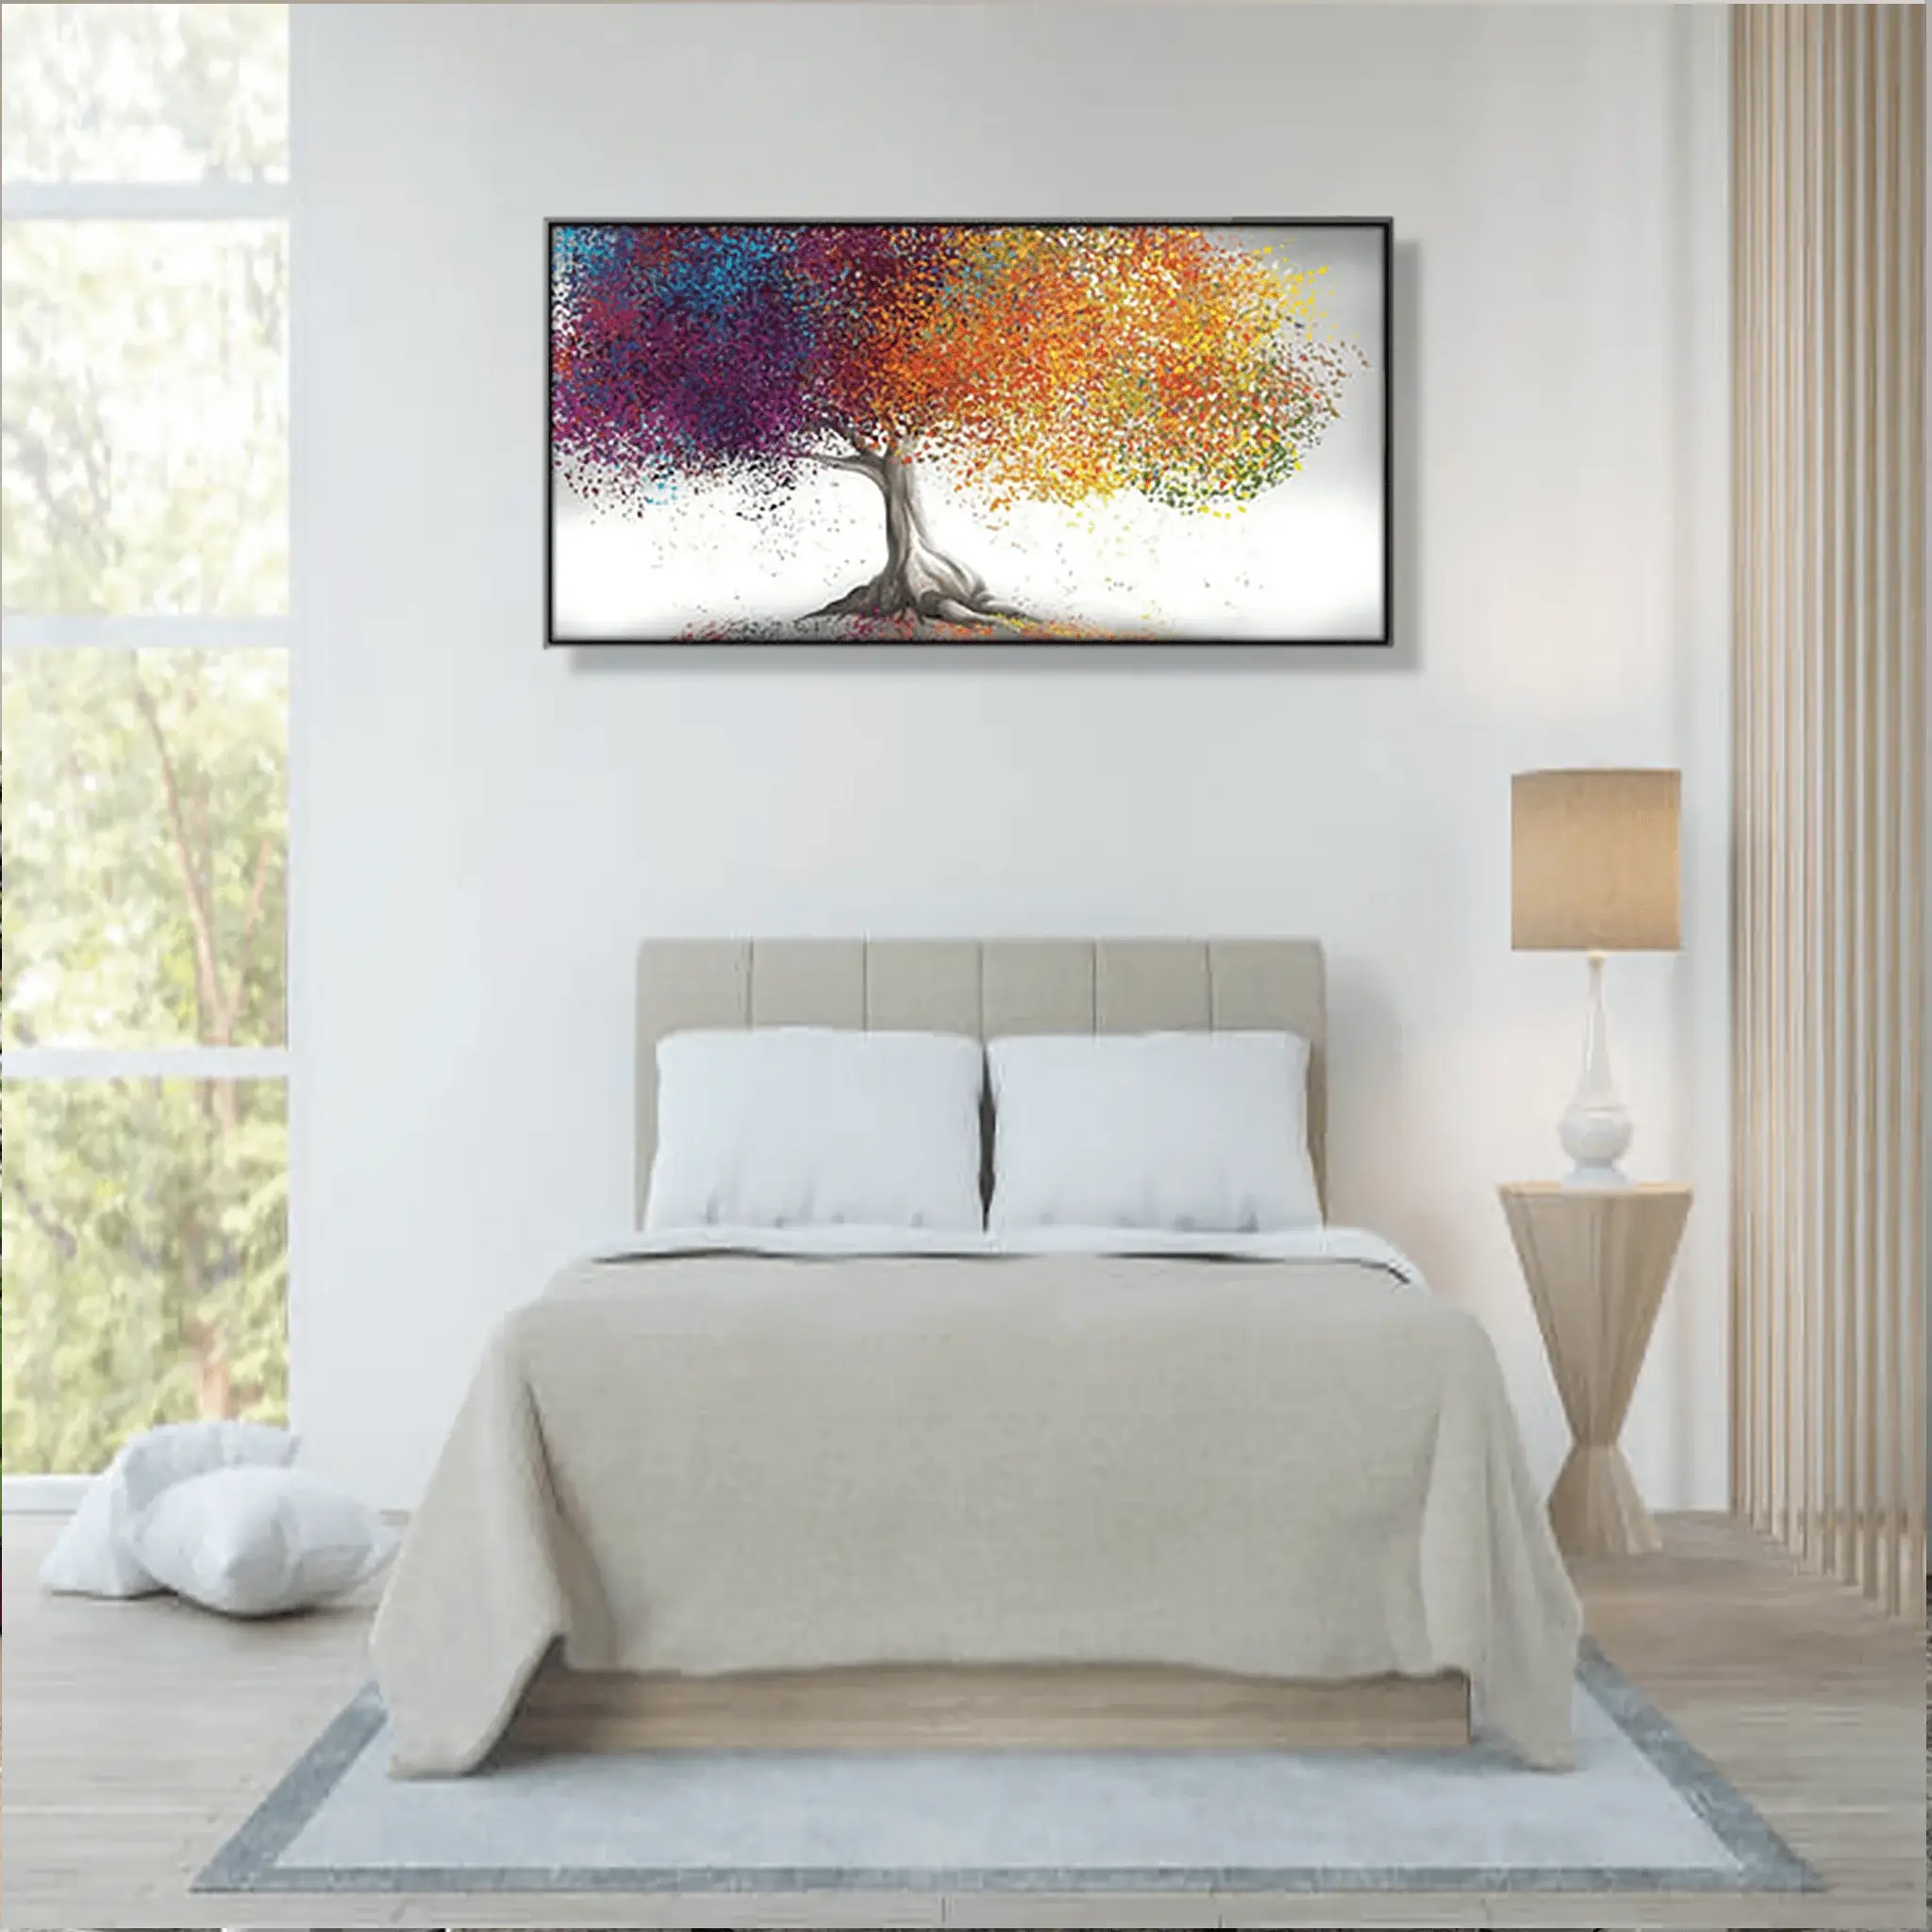 Multiple Color Leaves on tree Canvas Wall Painting